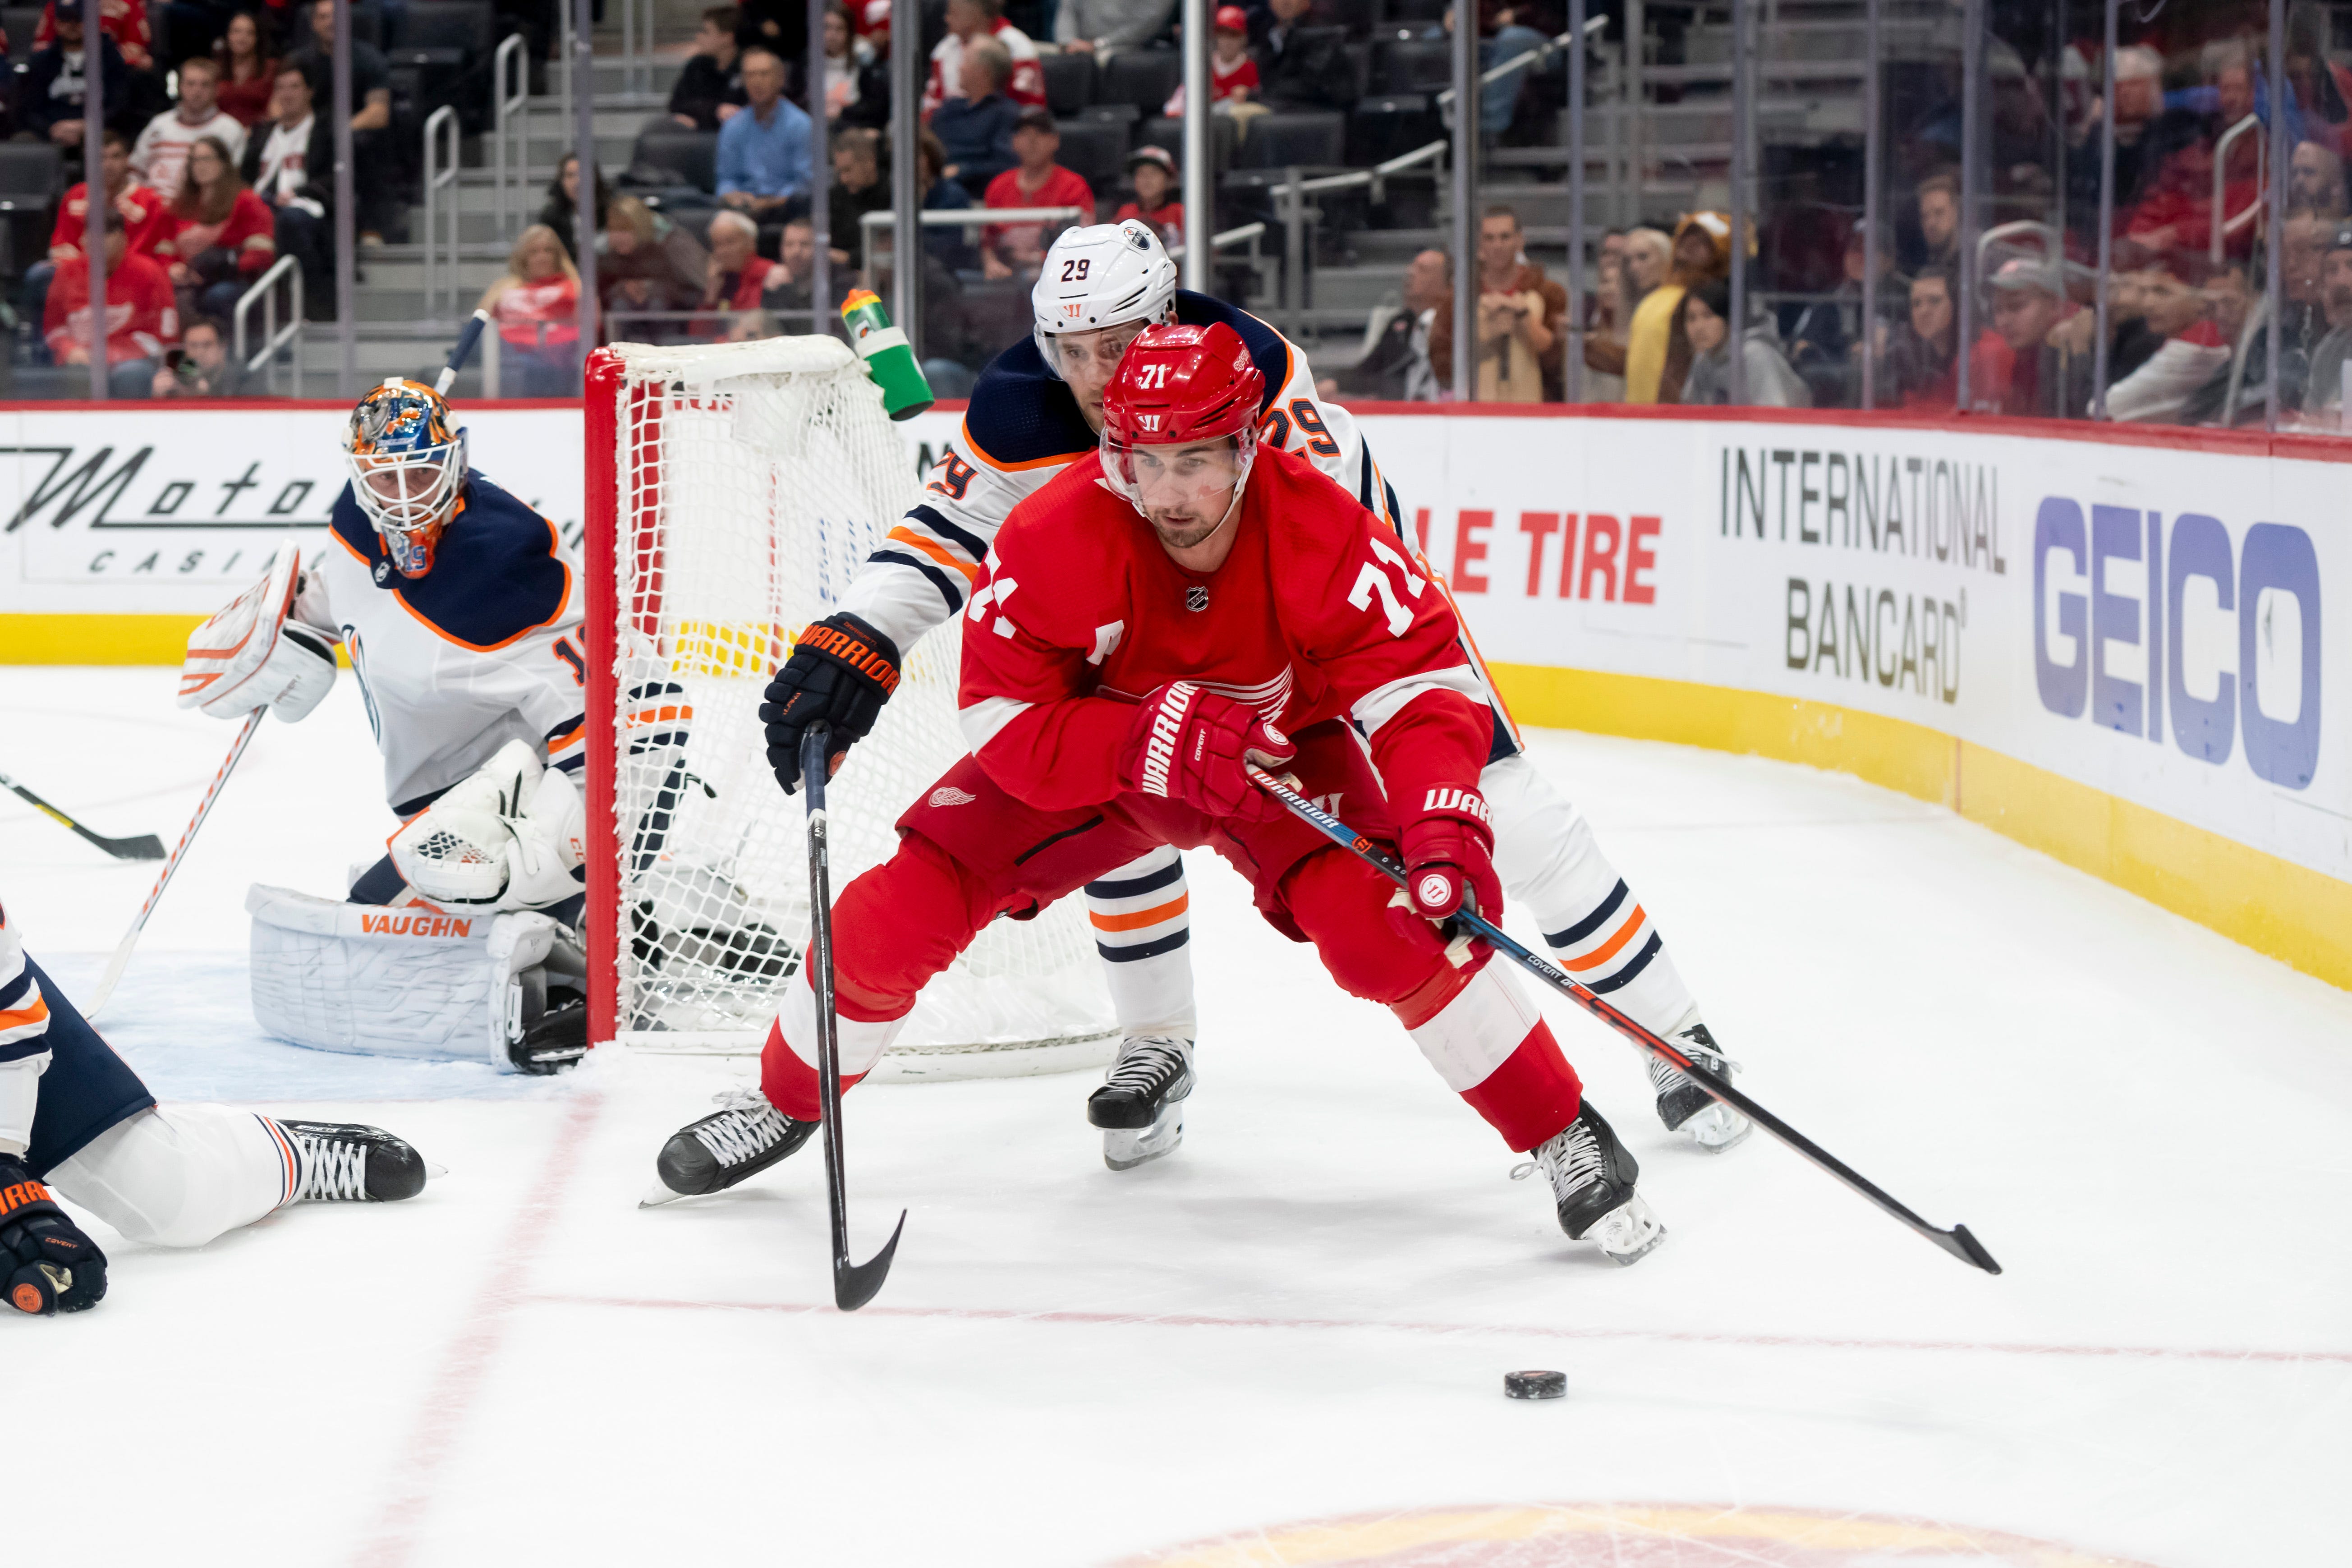 Dylan Larkin – AGE: 23: CONTRACT: Ends 2023, $6.1 million per. STATS: 71 games, 19 goals, 34 assists. COMMENT: Larkin was a different player after Christmas, understanding he couldn’t shoulder the load by himself, and got better using his linemates. His leadership qualities are impressive. Likely the Wings’ next captain. GRADE: B-plus.